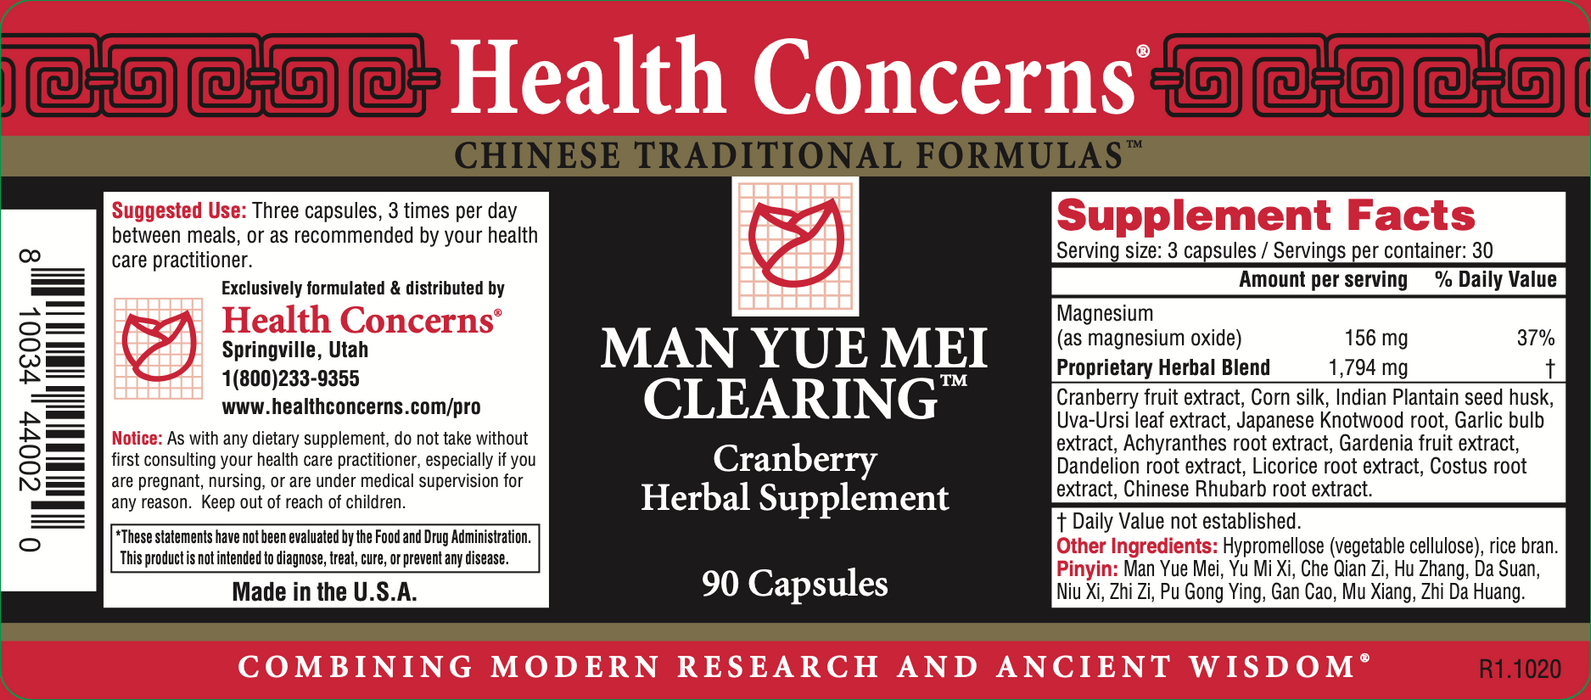 Man Yue Mei Clearing (90 Capsules)